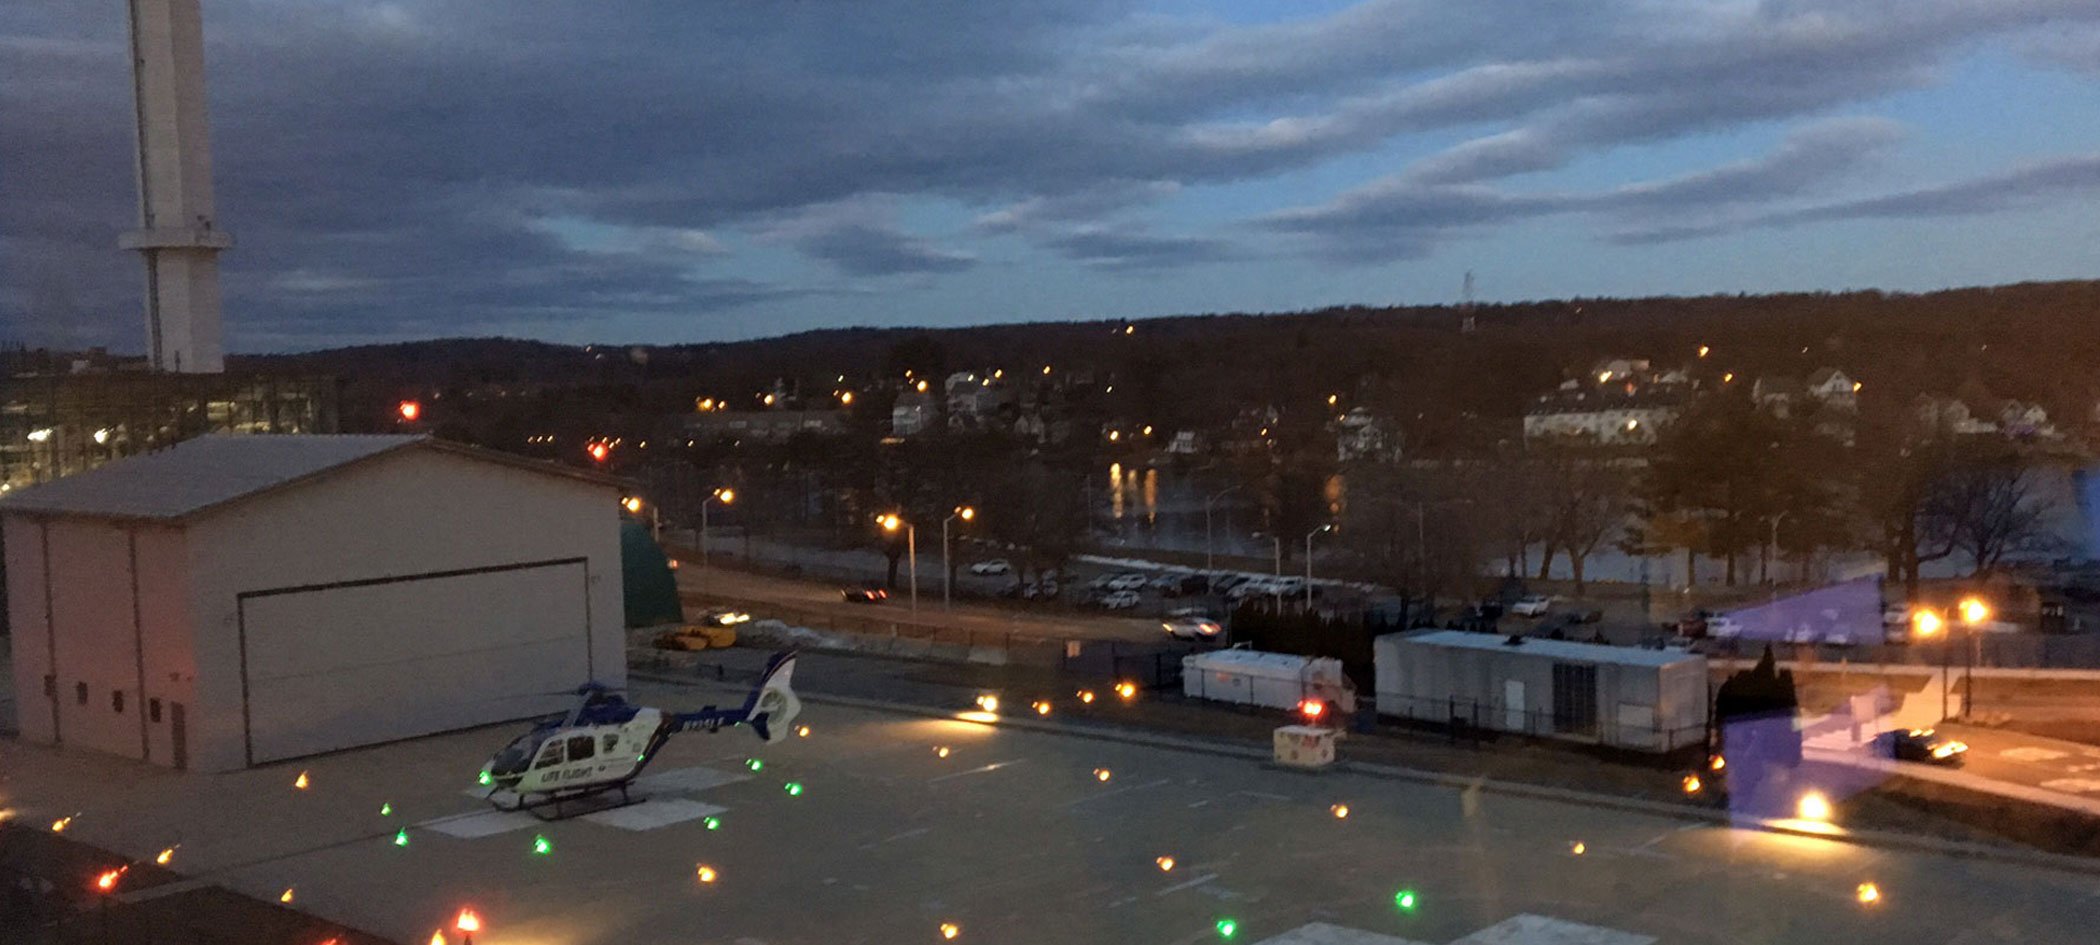 Neurocritical Care home of the level 1 trauma and life flight center in Western Massachusetts